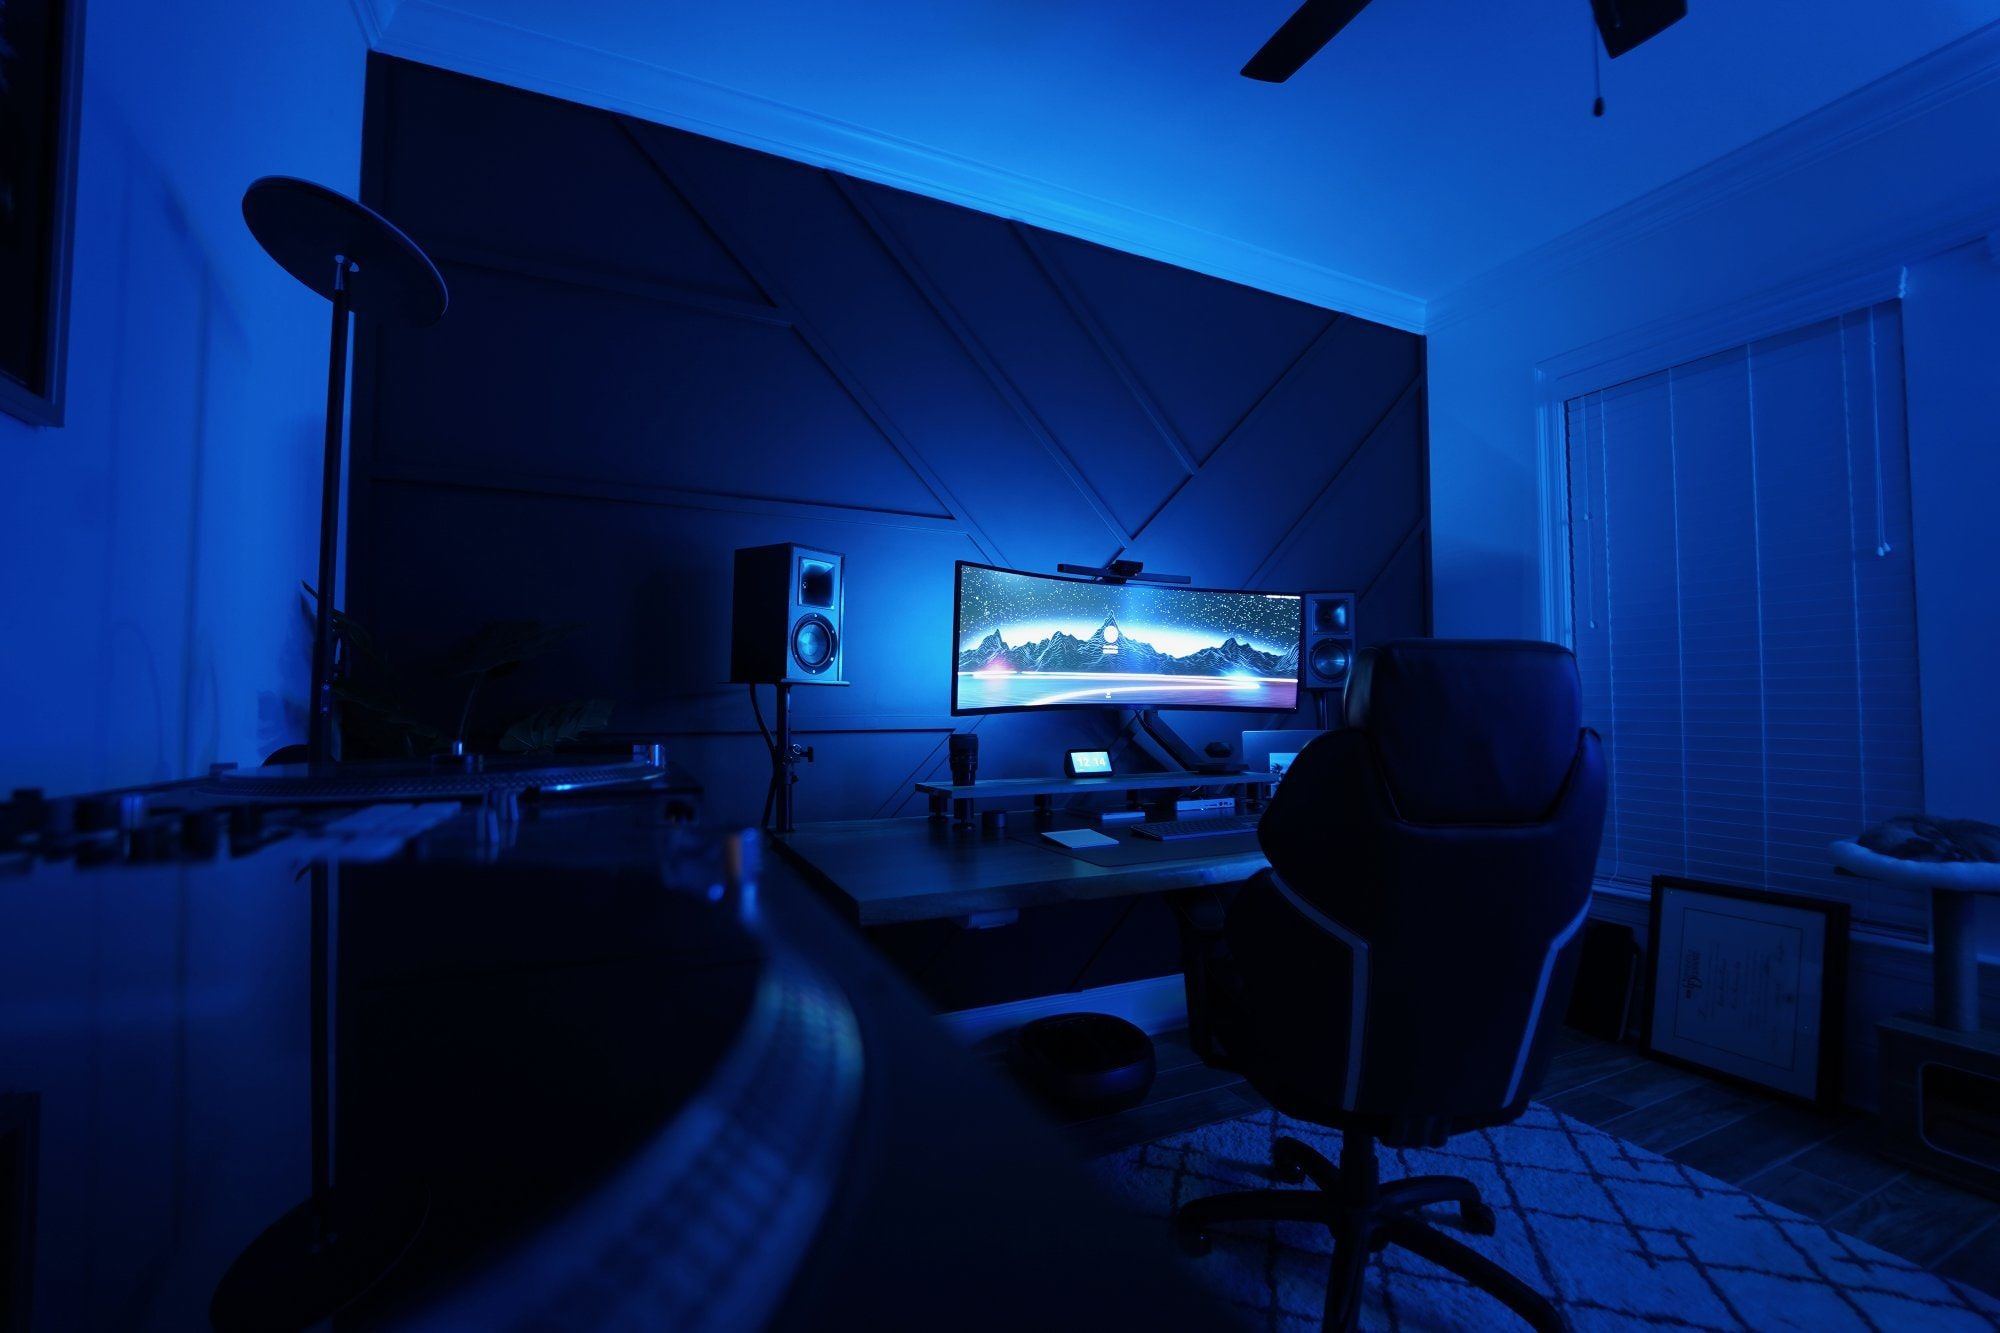 A home office in evening-blue lighting